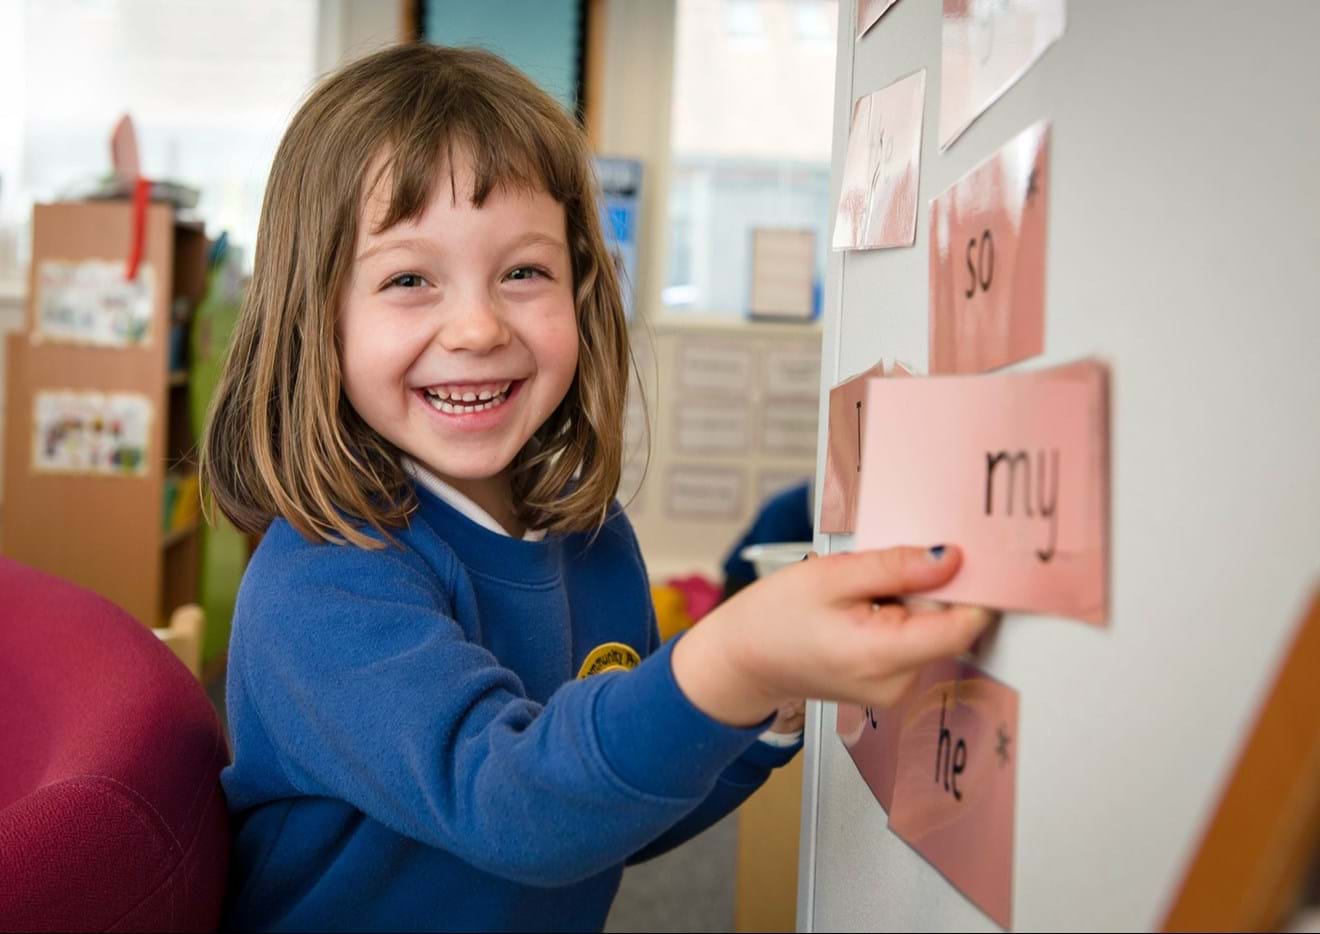 A student smiles while placing a word on the whiteboard